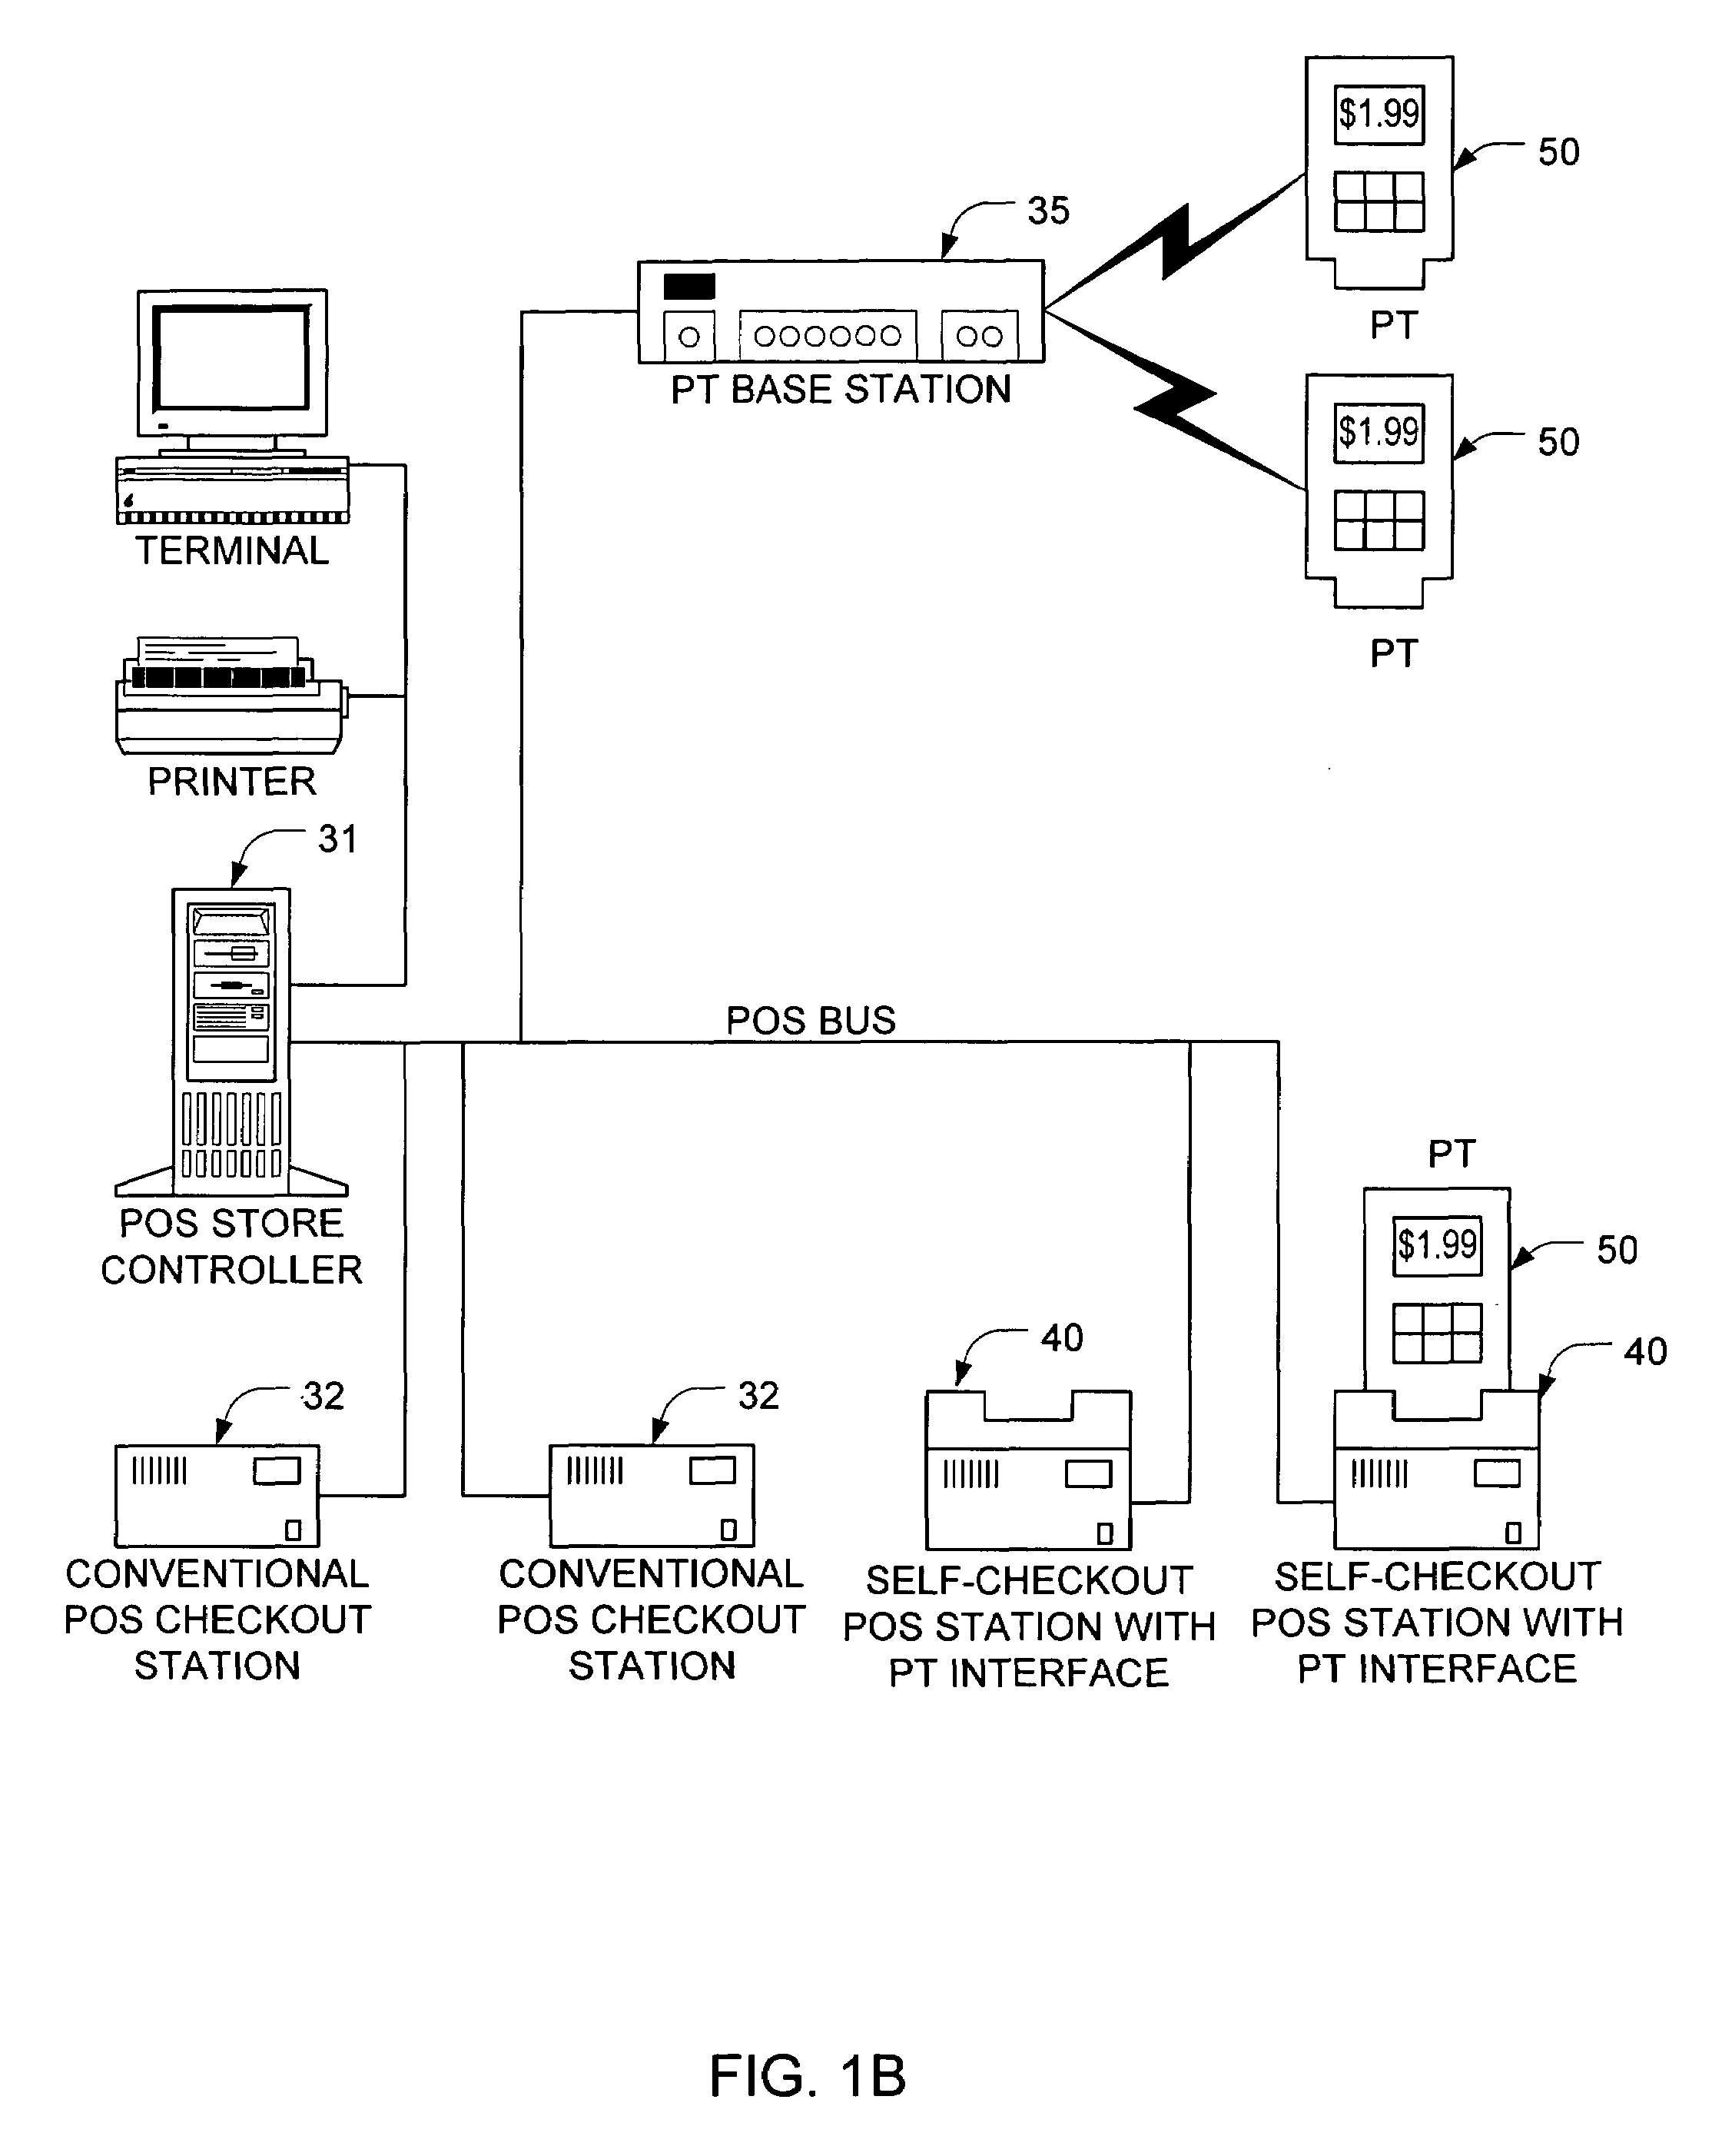 Fixed self-checkout station with cradle for communicating with portable self-scanning units